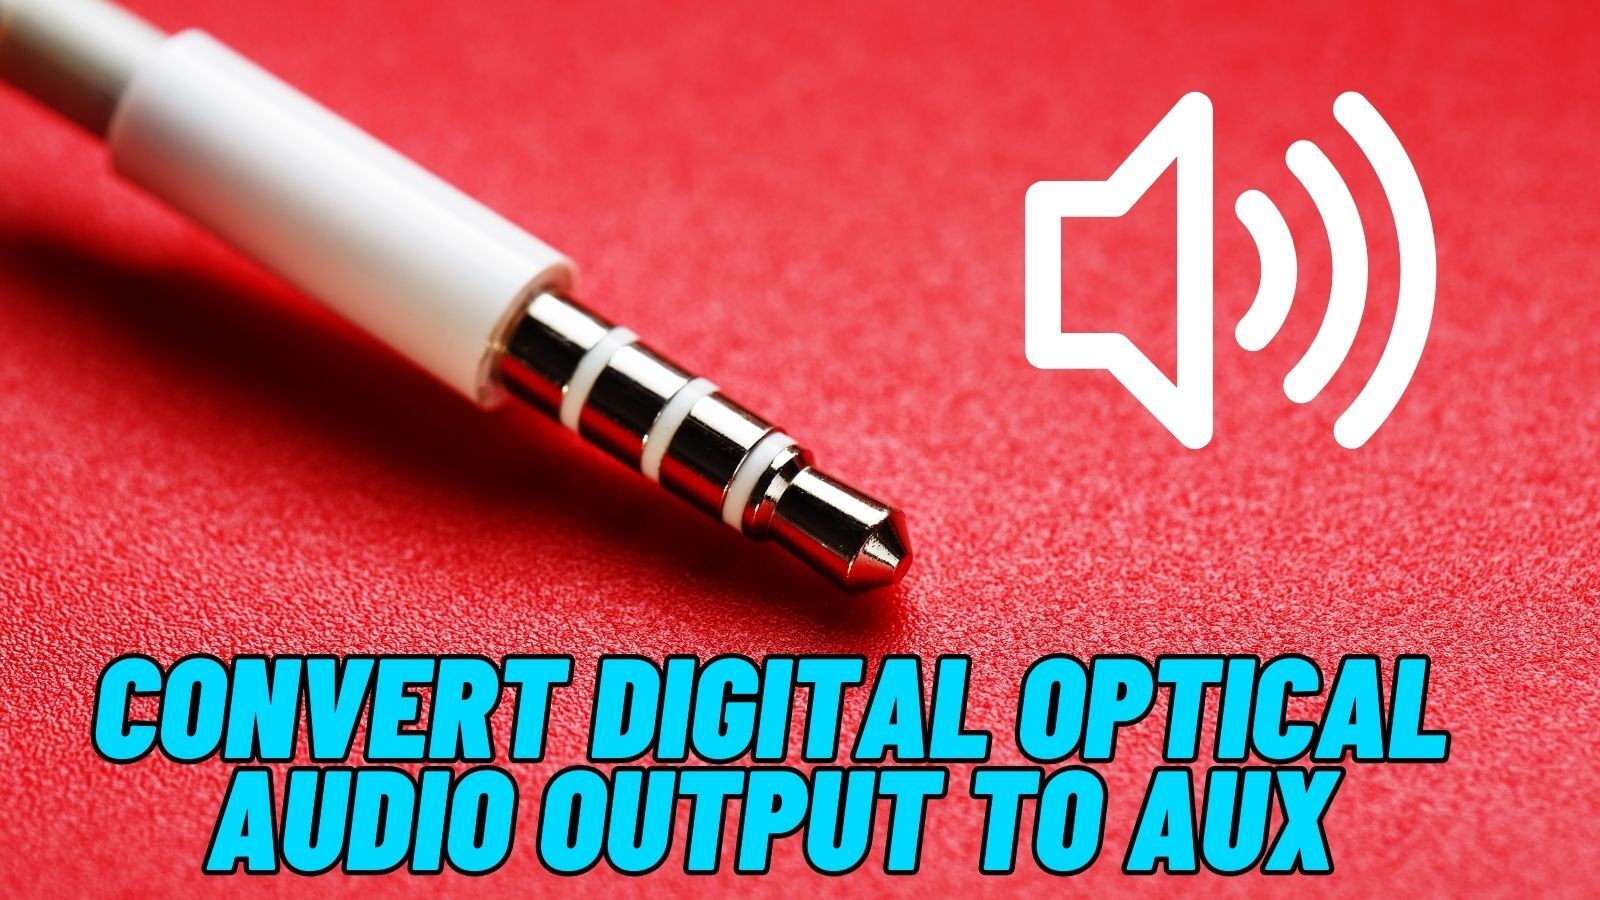 How to Convert Digital Optical to AUX? (A Full Guide)